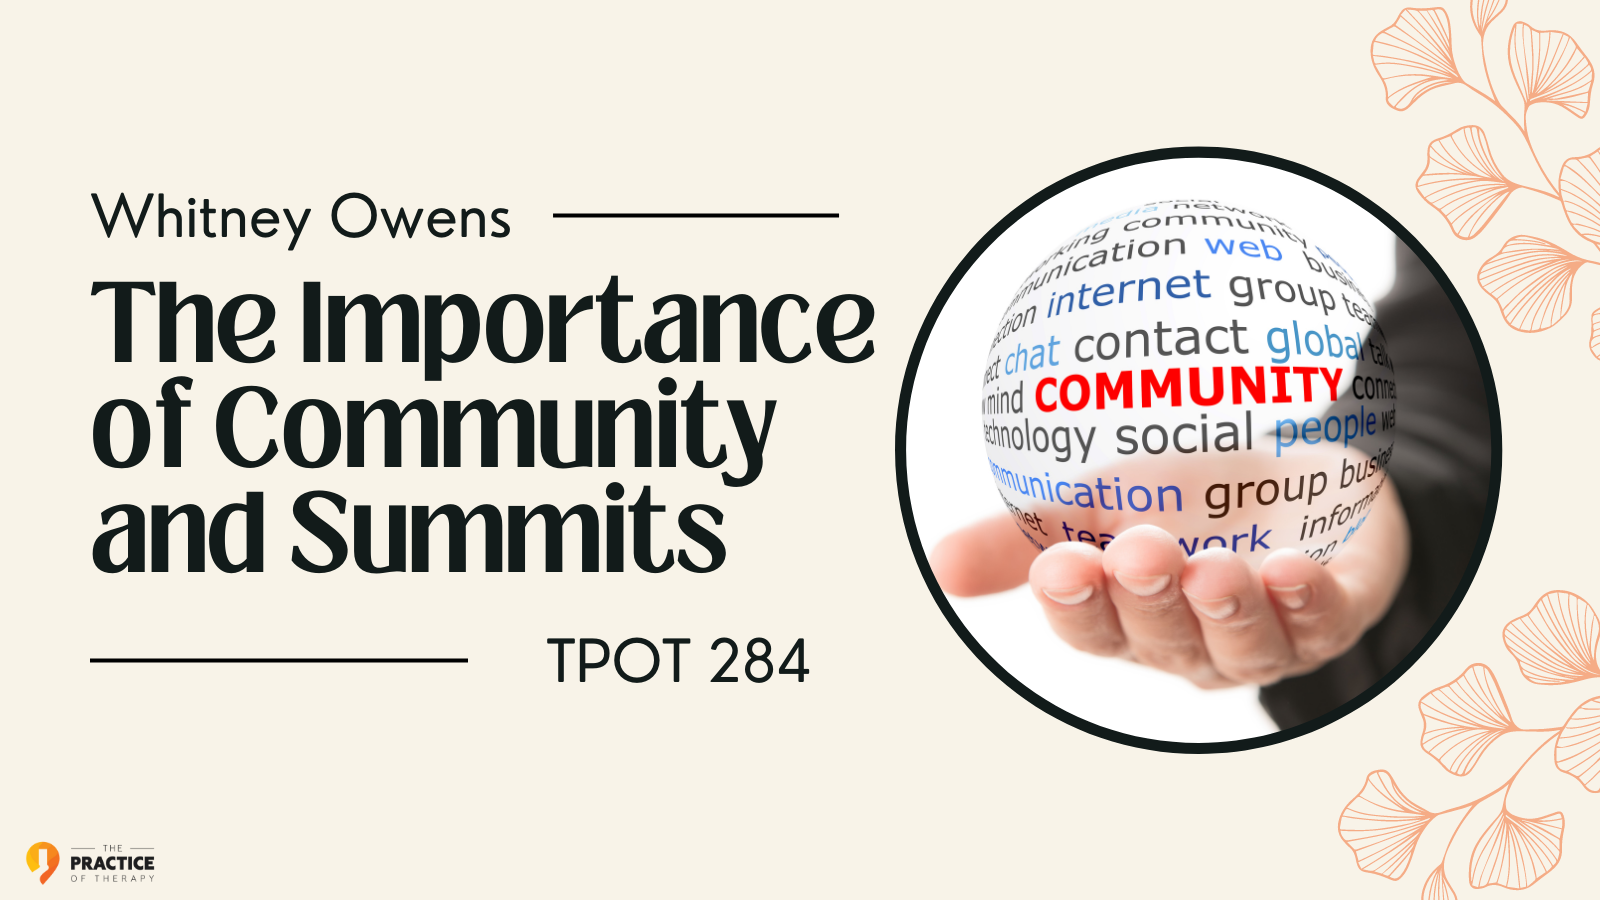 Whitney Owens The Importance of Community and Summits TPOT 284